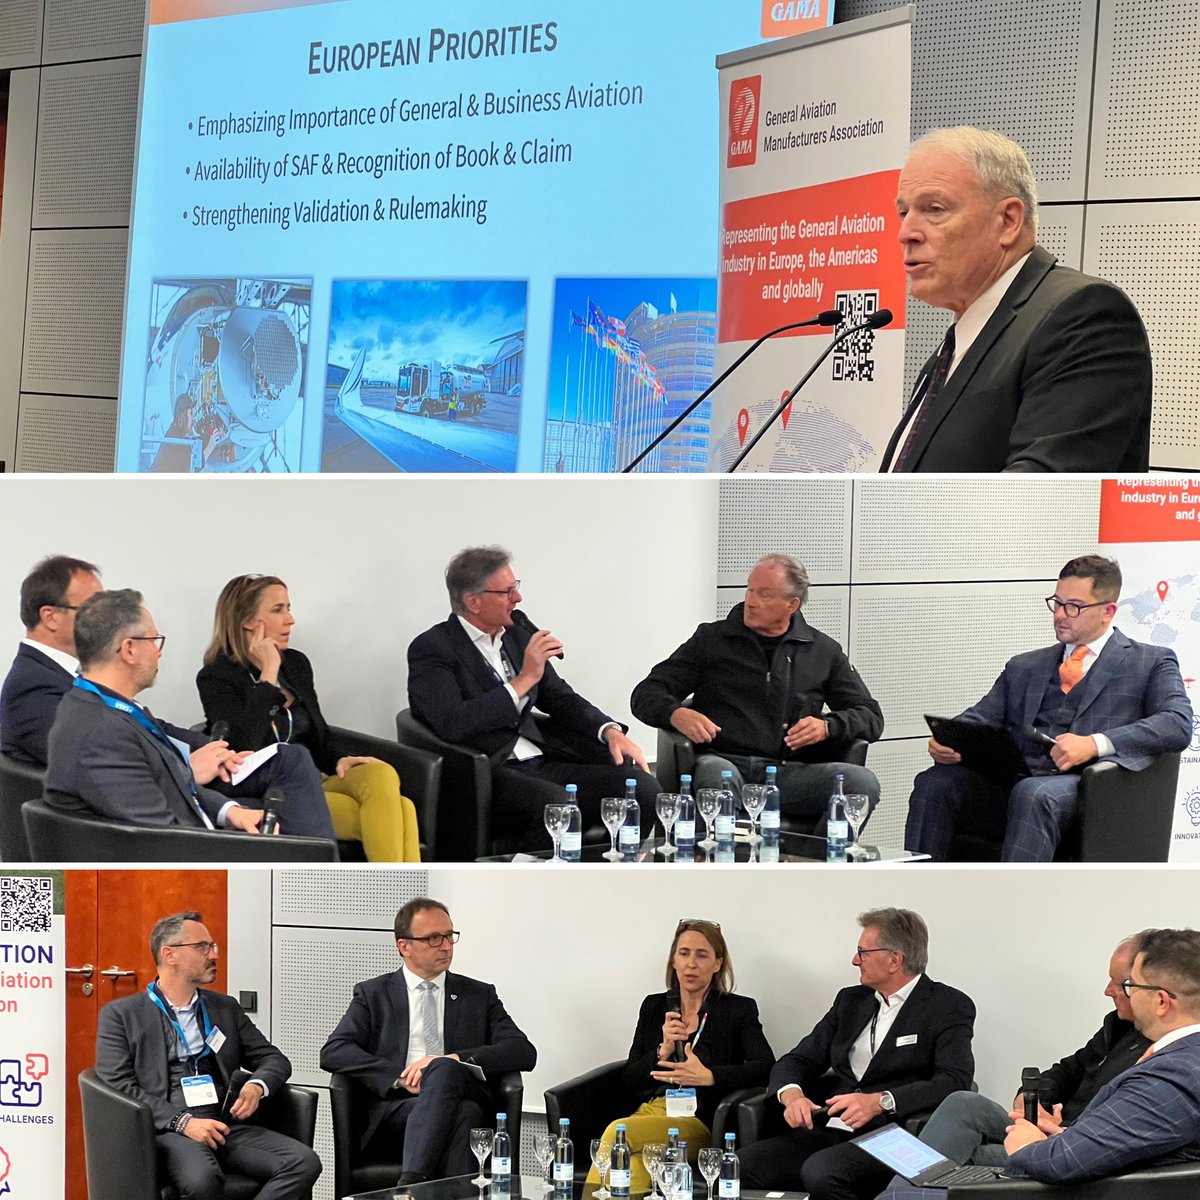 During our press conference at AERO Friedrichshafen, we covered our priorities in Europe and hosted a panel discussion on accelerating the development of electric aviation with leaders of @DAHER_official, H55, @Lilium, @volocopter & @EASA